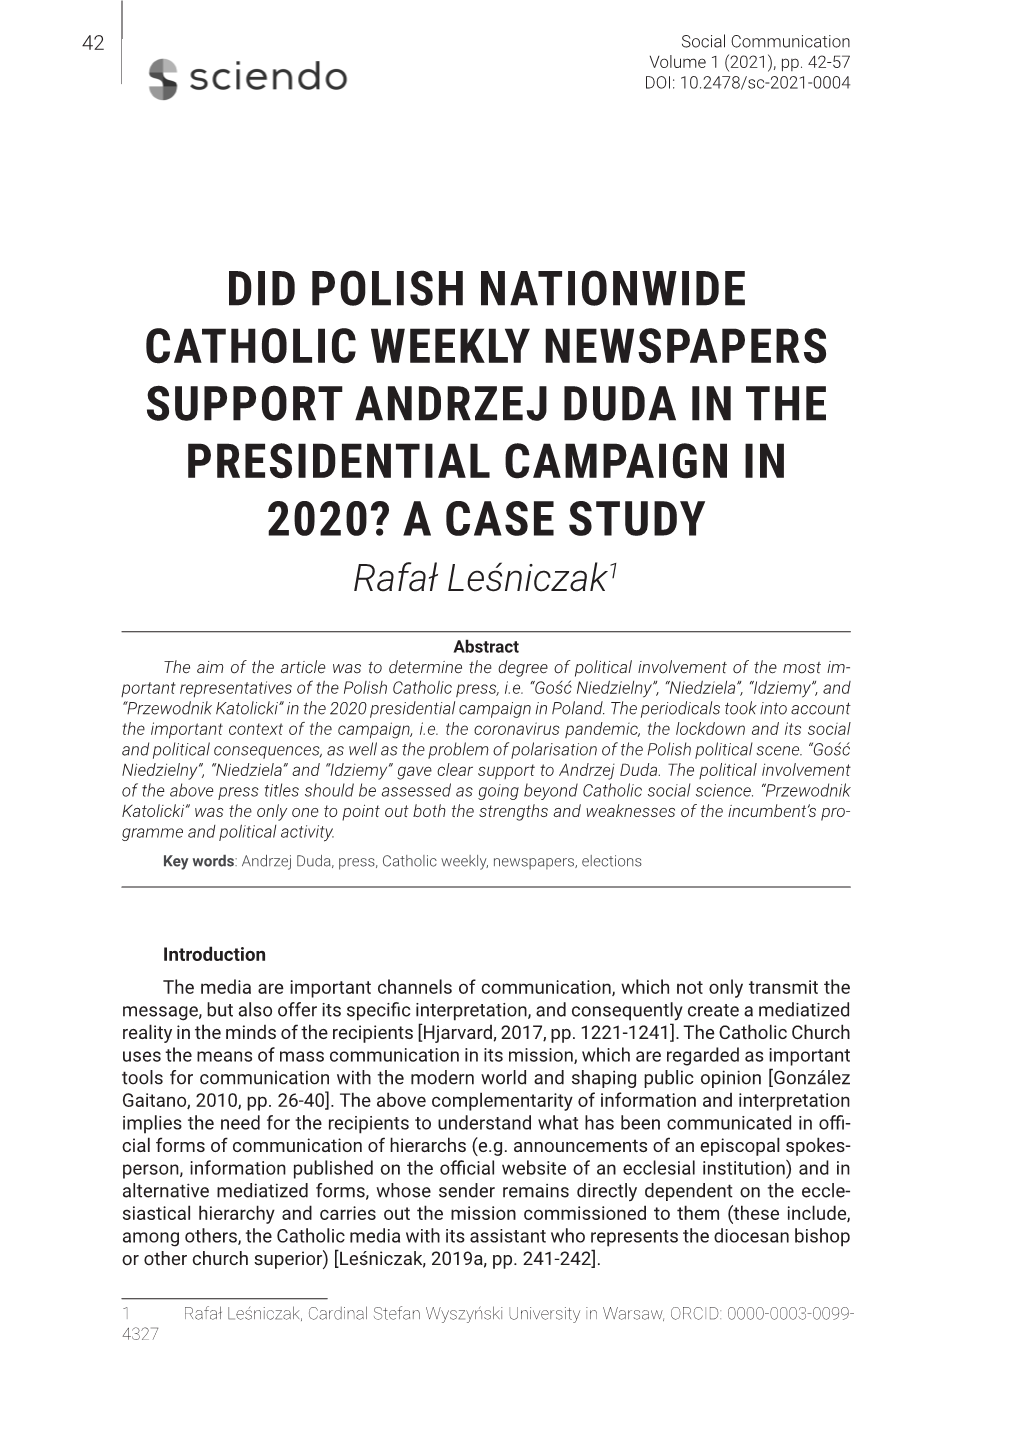 DID POLISH NATIONWIDE CATHOLIC WEEKLY NEWSPAPERS SUPPORT ANDRZEJ DUDA in the PRESIDENTIAL CAMPAIGN in 2020? a CASE STUDY Rafał Leśniczak1